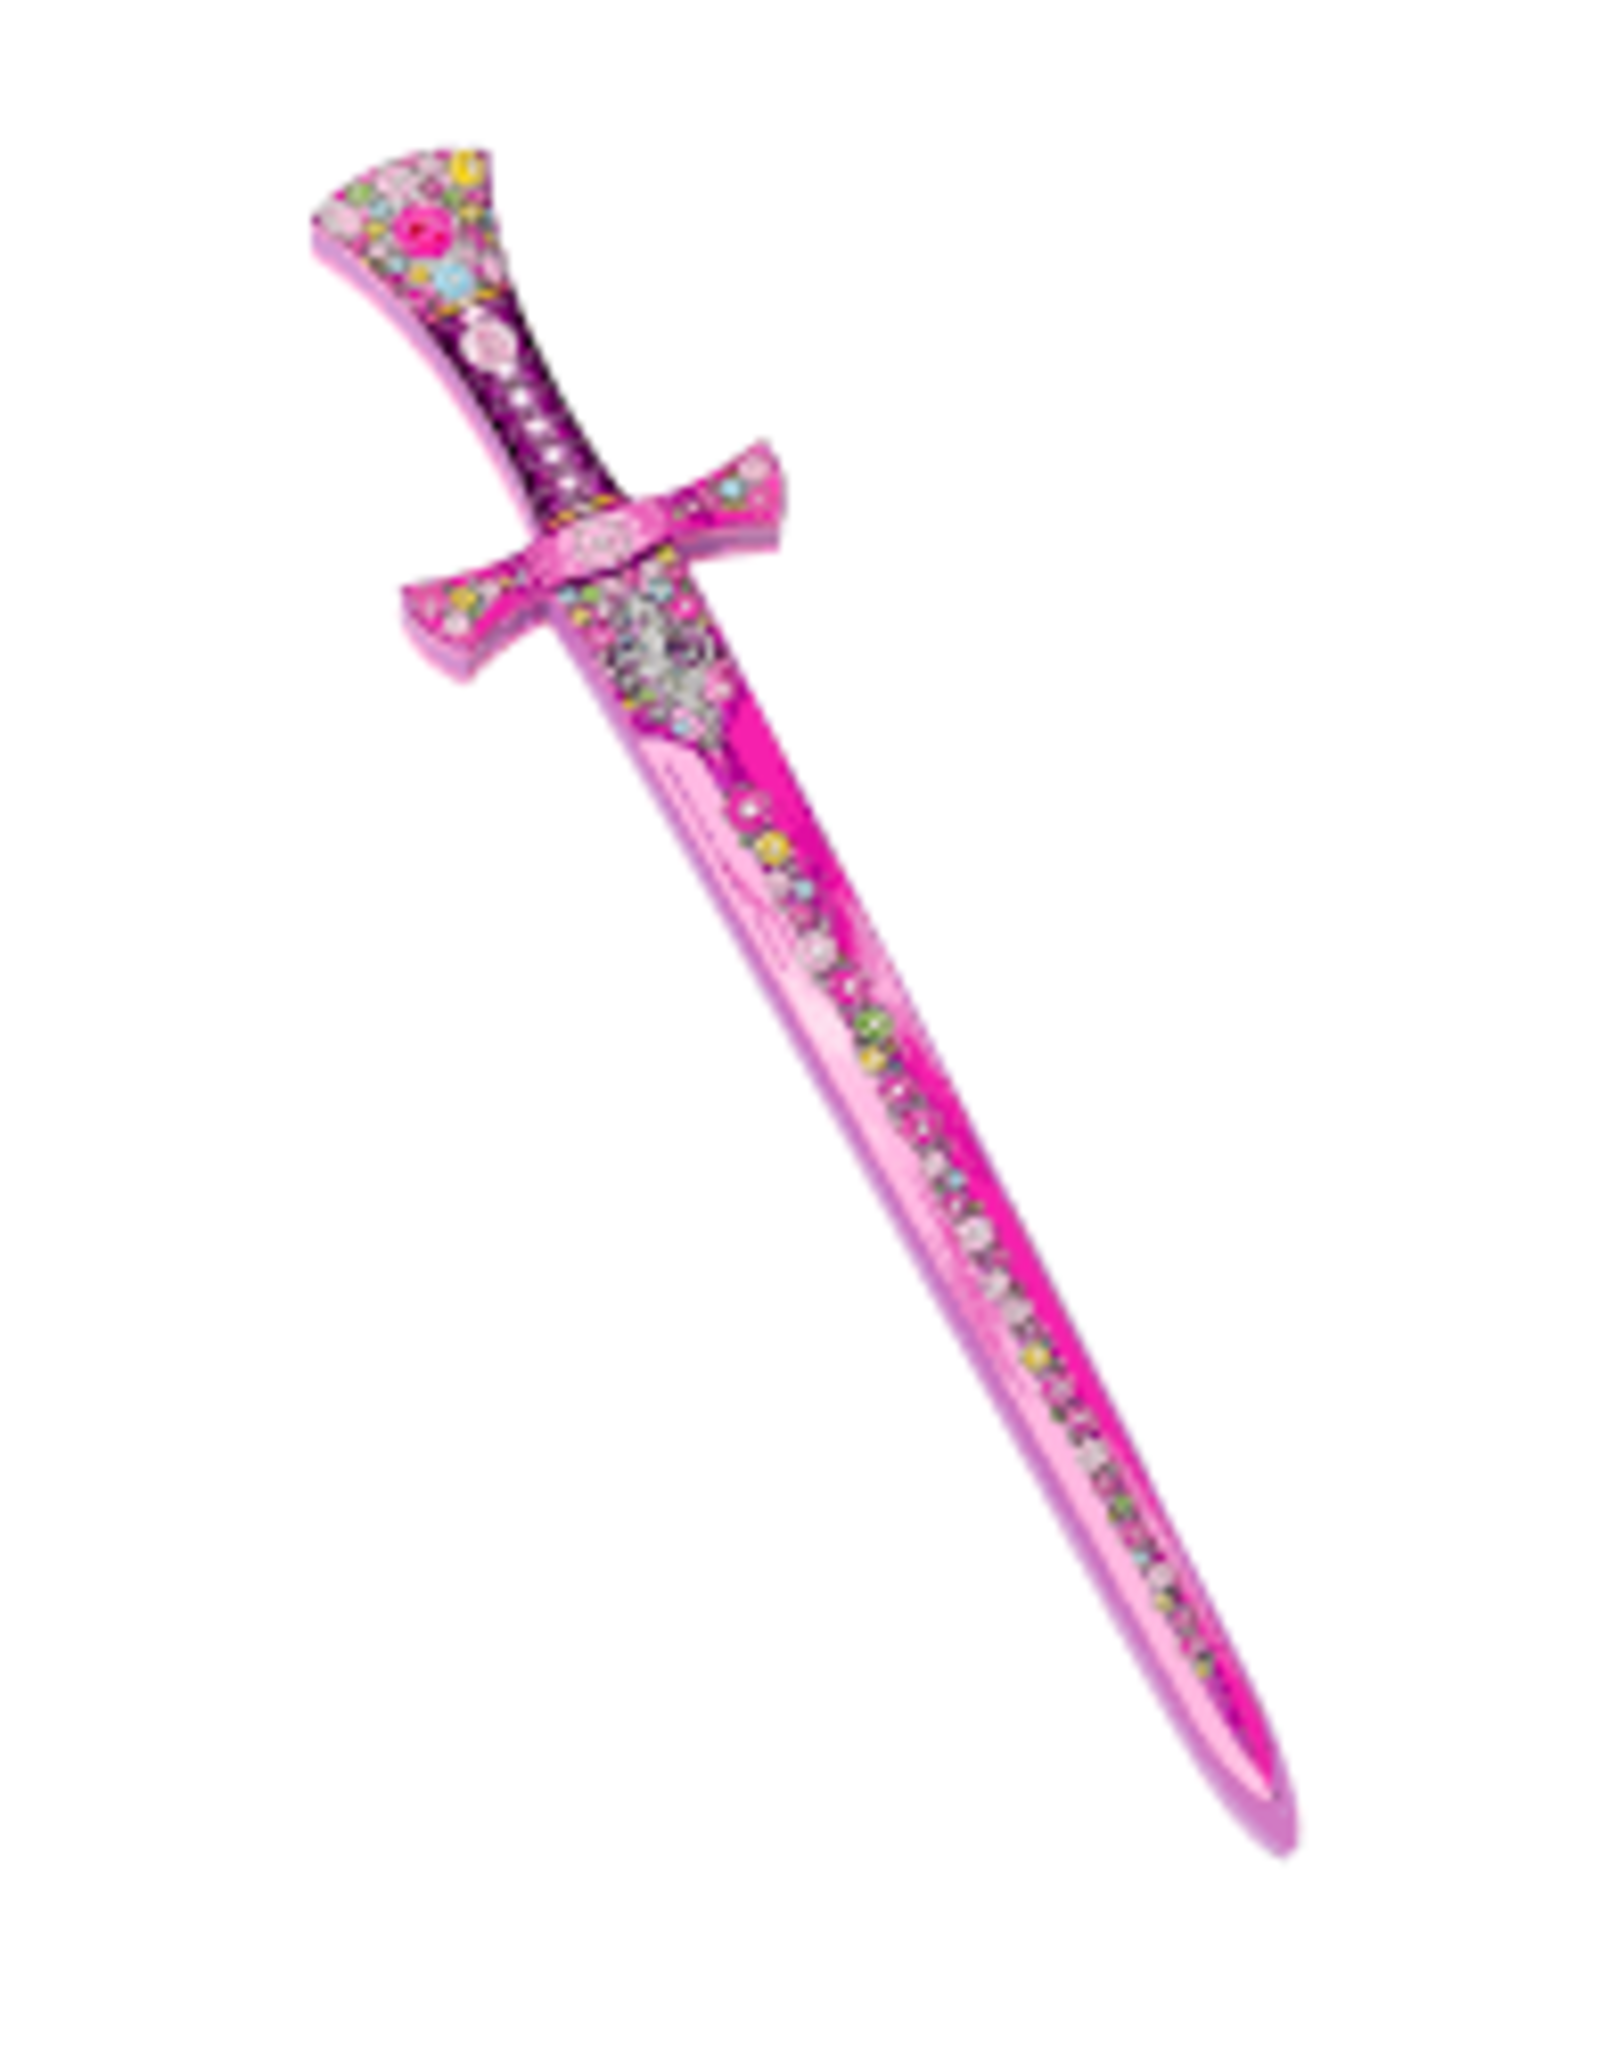 Liontouch Liontouch Crystal Princess Sword